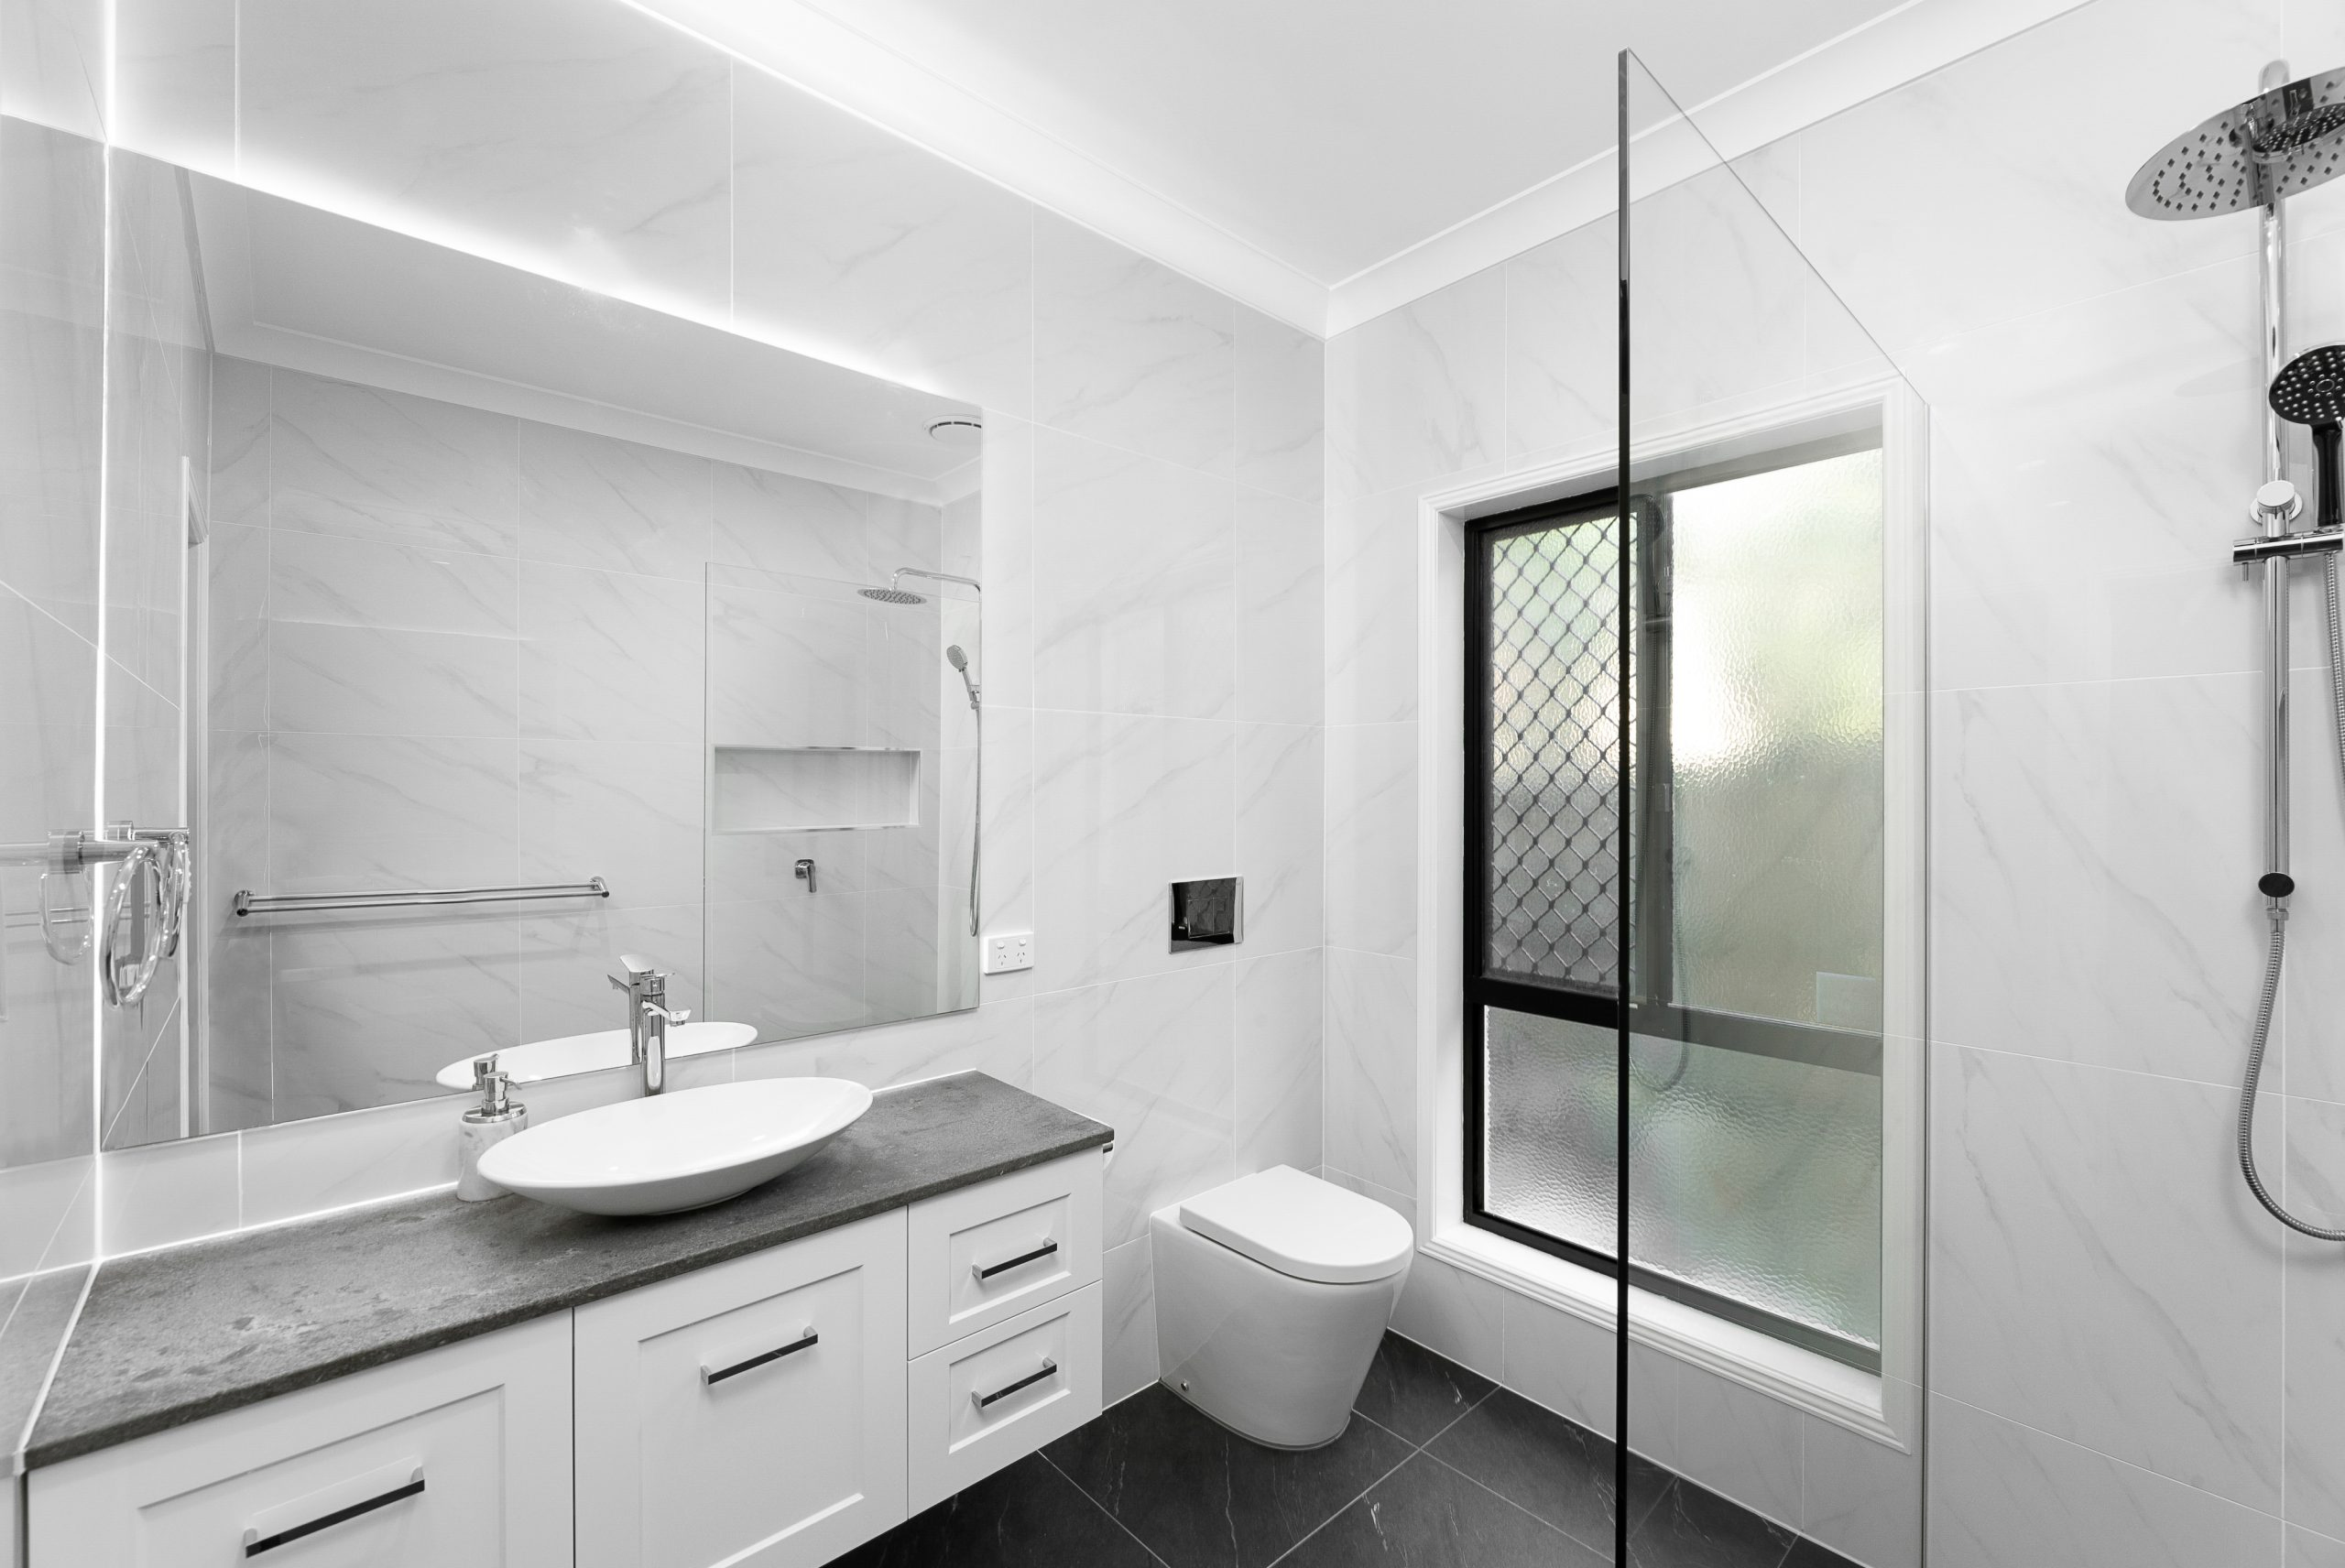 White modern bathroom with large mirror above the sink